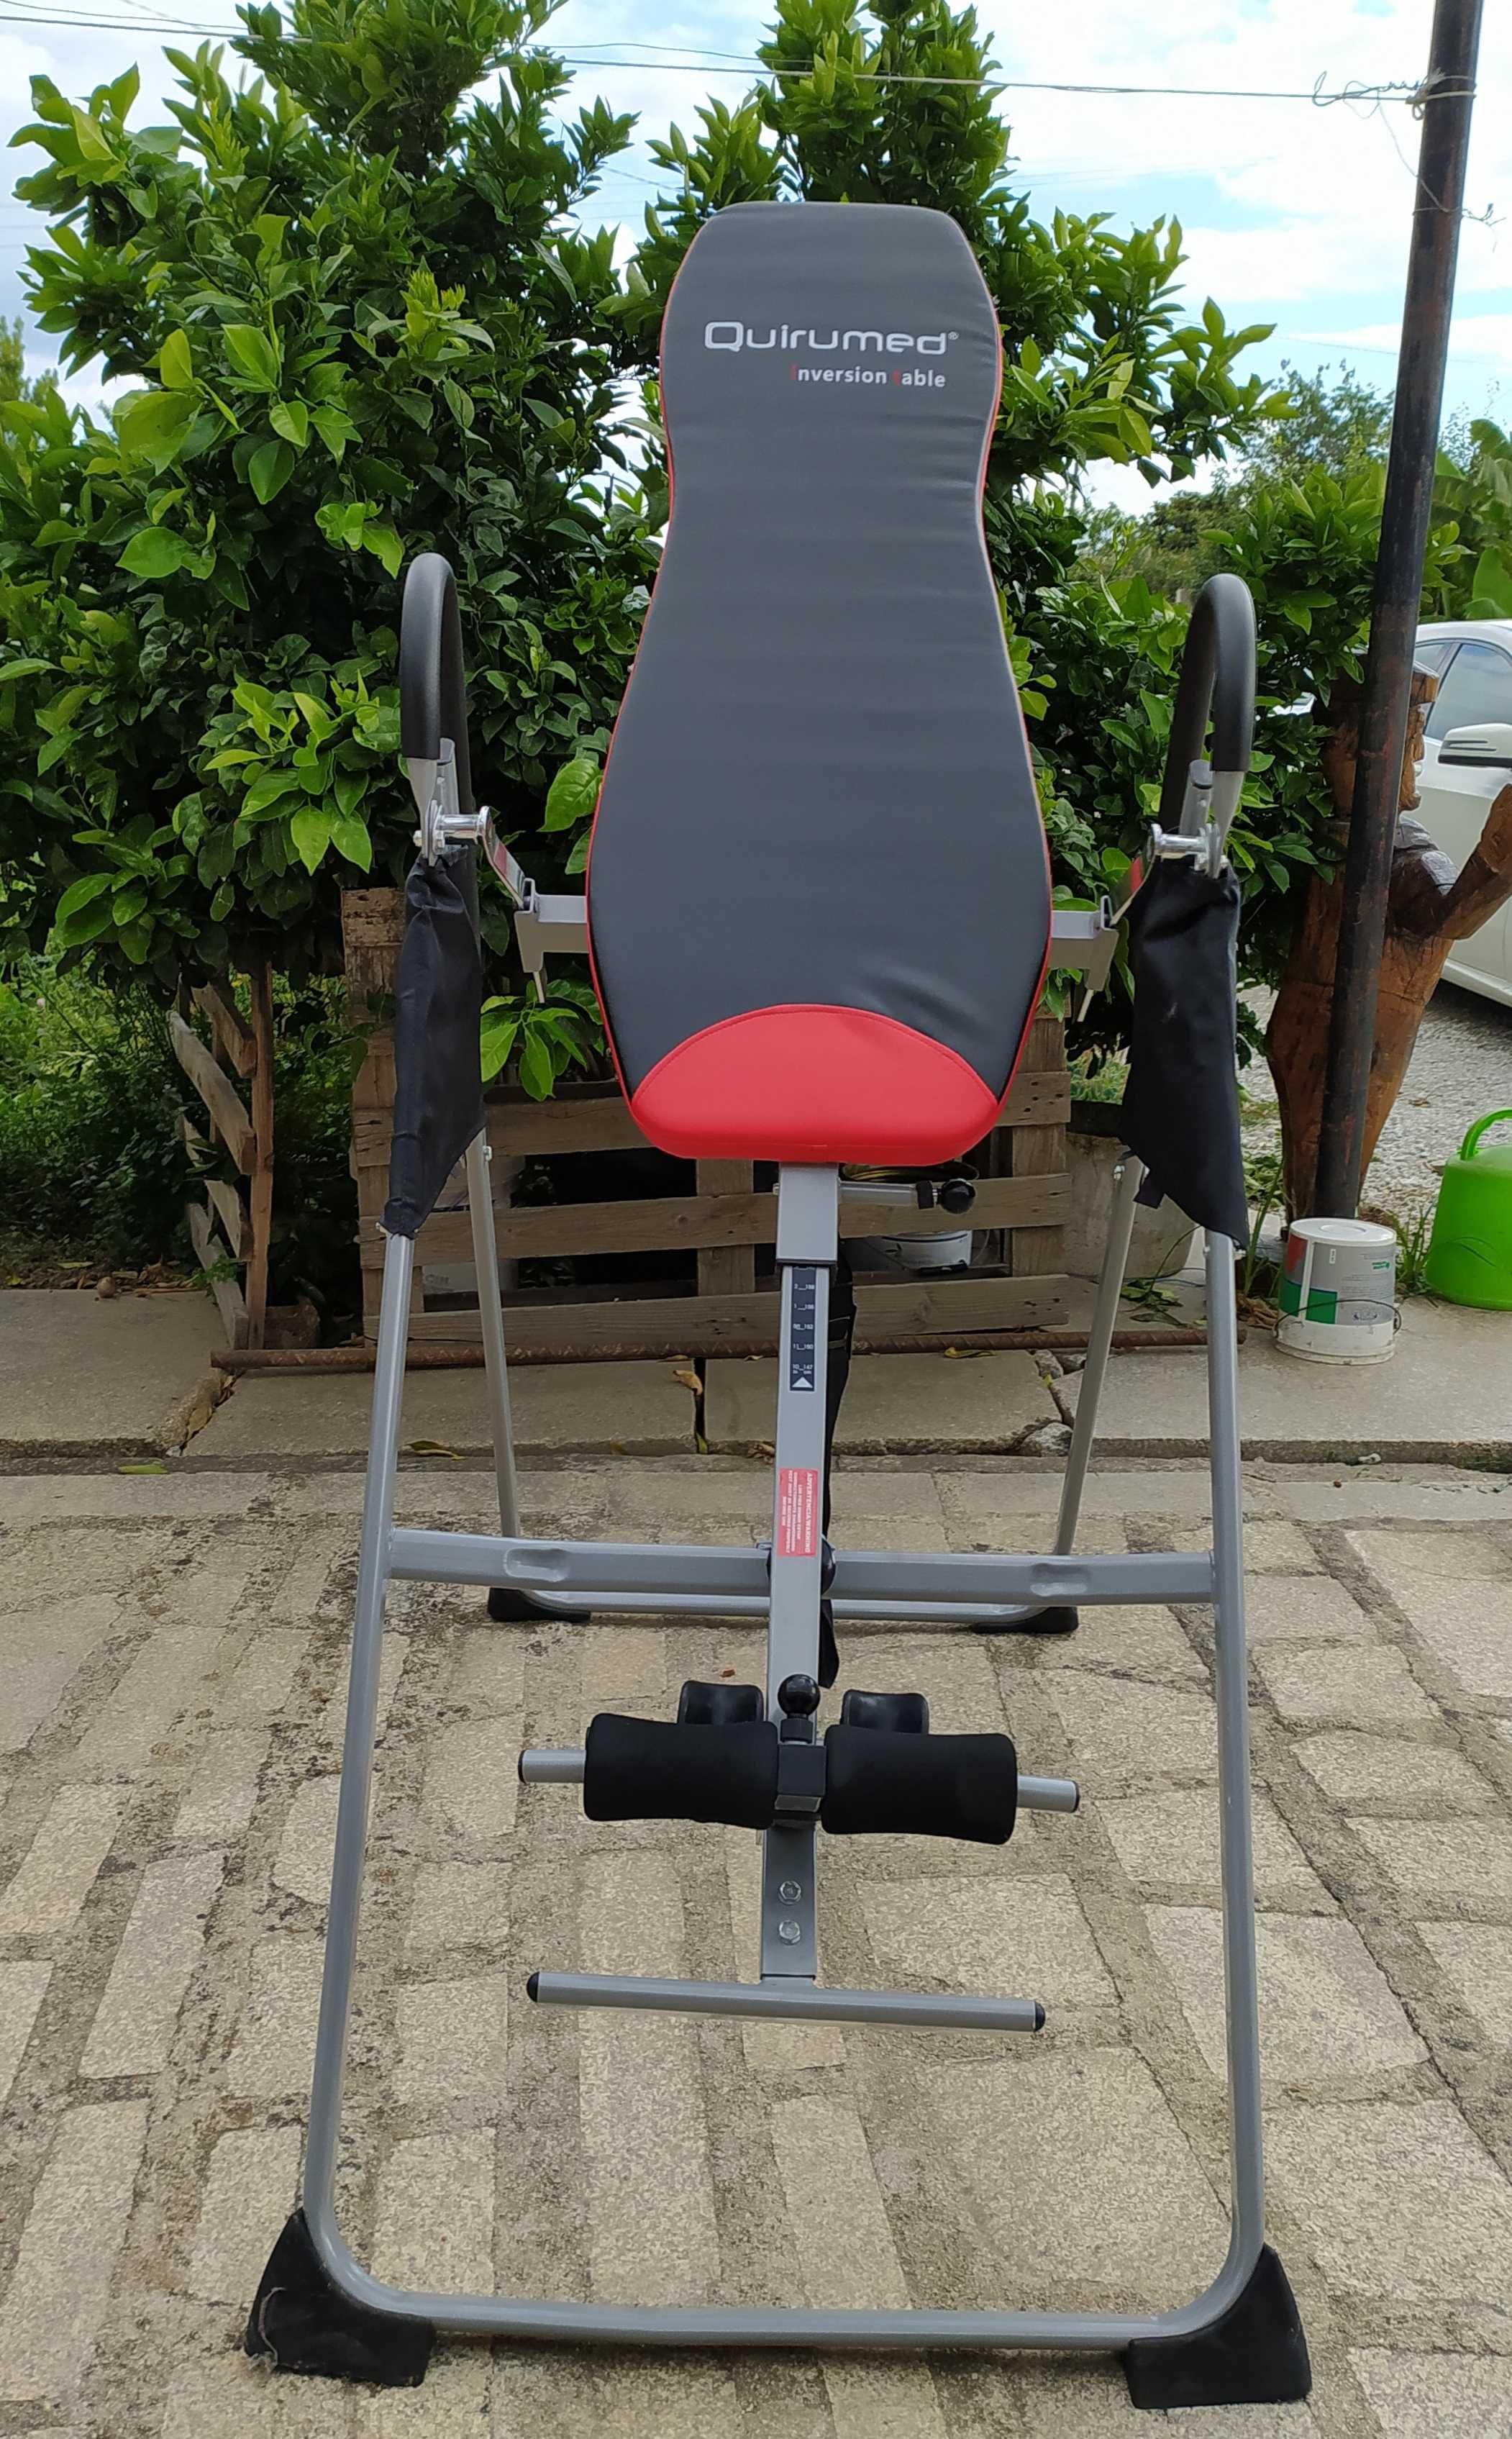 QUIRUMED Inversion Table